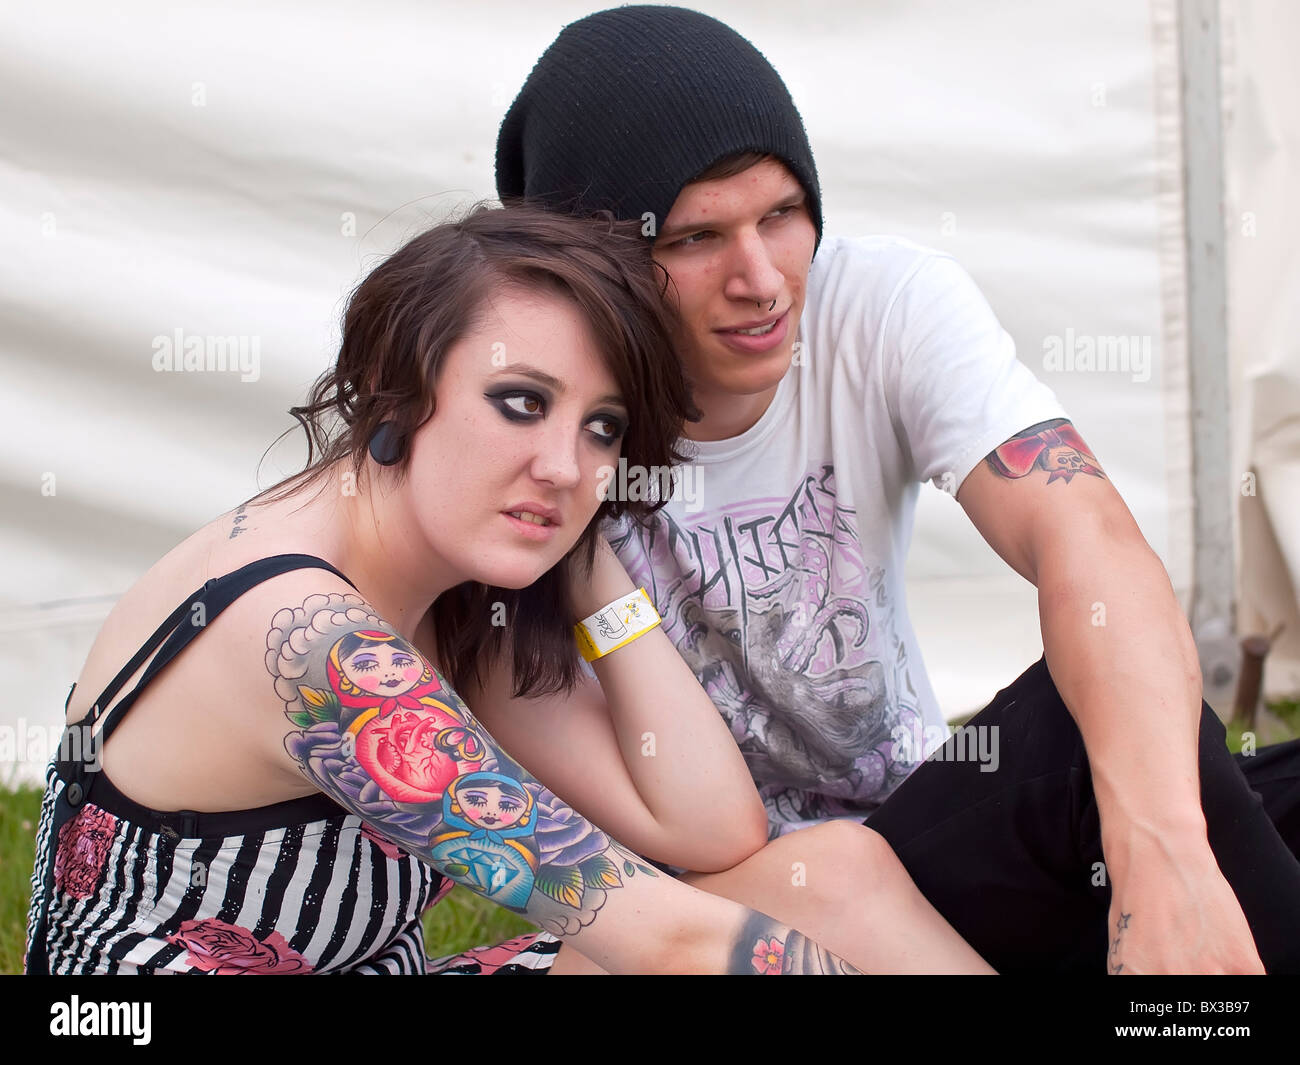 Lucy a trendy young female adult nineteen year old with tattoos with boy friend Blair (real people) at youth festival Stock Photo